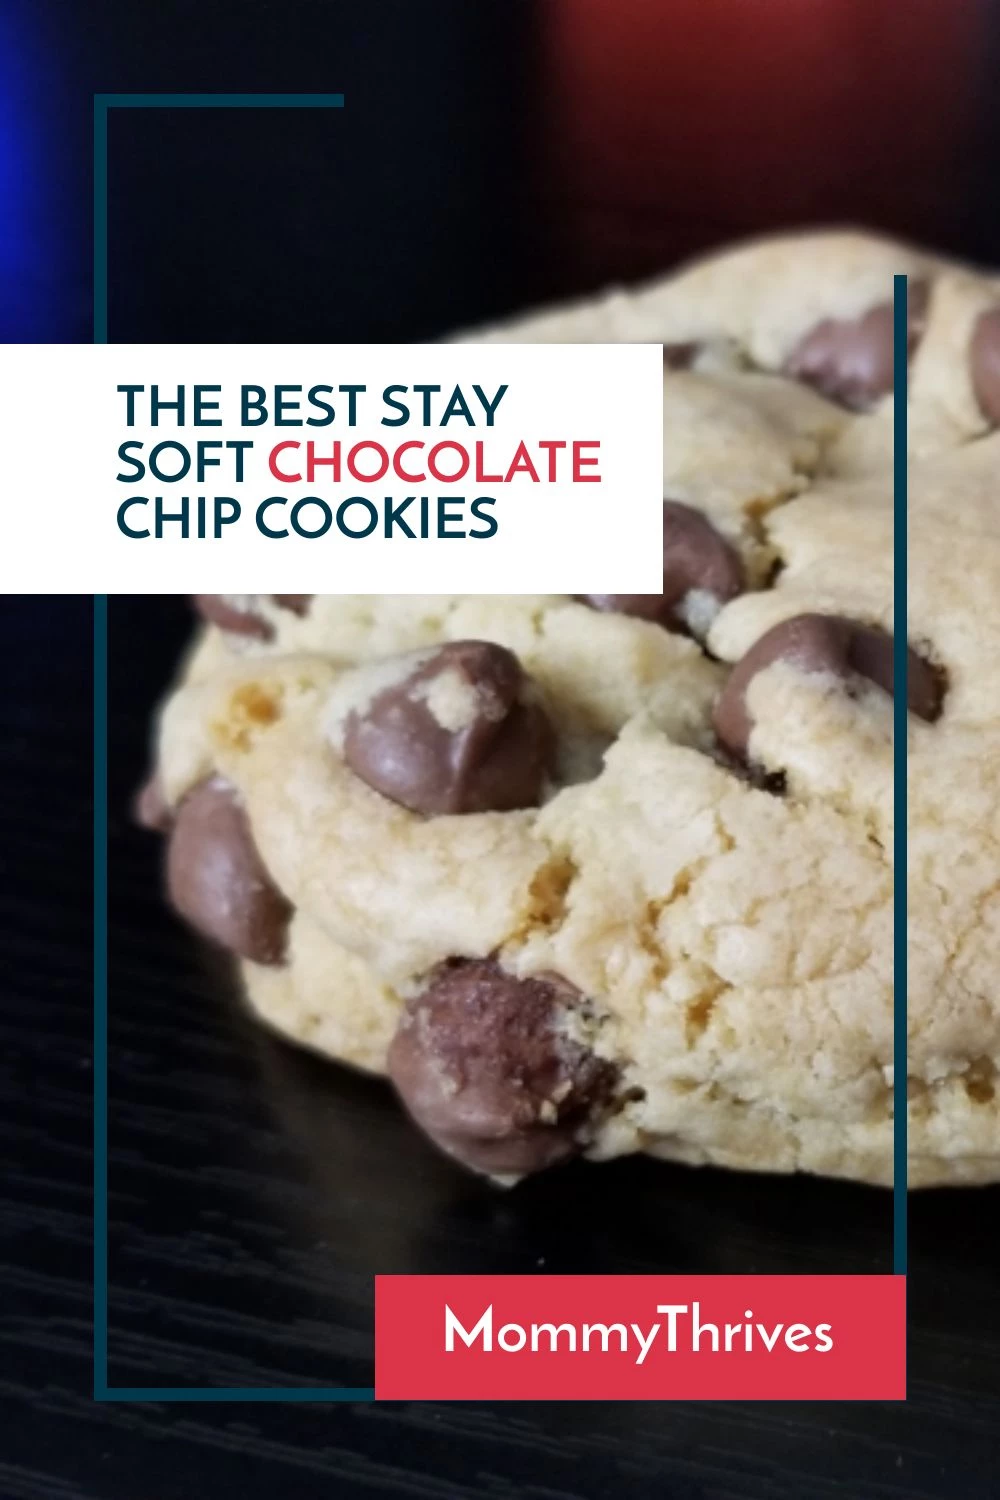 One Day Chocolate Chip Cookies - The Best Chocolate Chip Cookie Recipes - Stay Soft Chocolate Chip Cookies